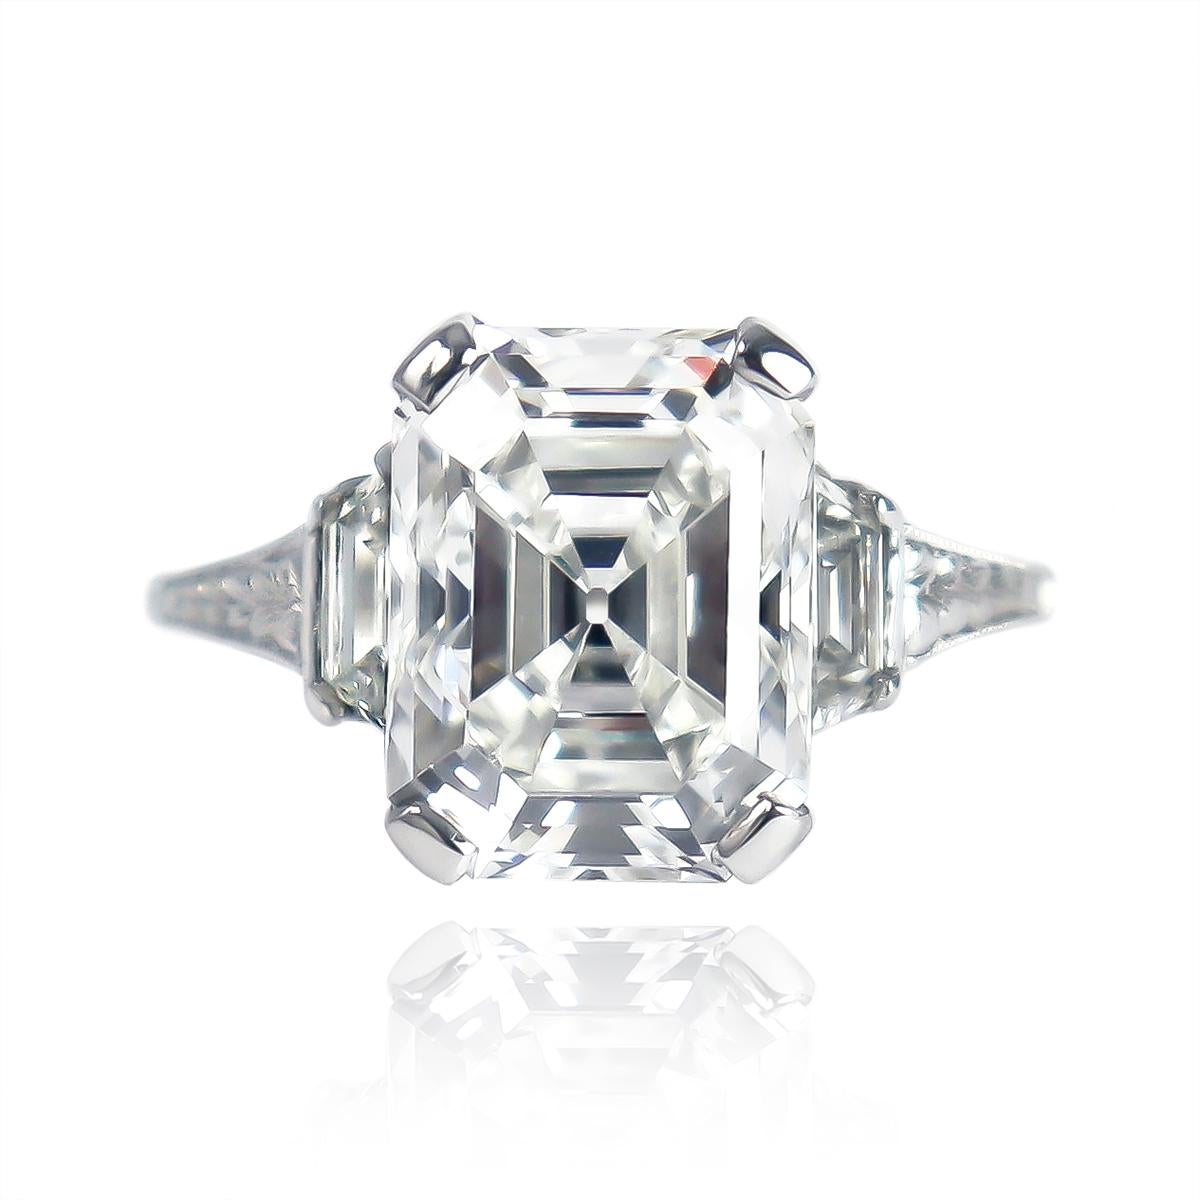 This breathtaking, vintage ring from the J. Birnbach collection features a GIA certified 4.12 carat emerald cut diamond of F color and SI1 clarity... As a 100% eye-clean SI1, this stone's depth allows for scintillating play of light with a charming,